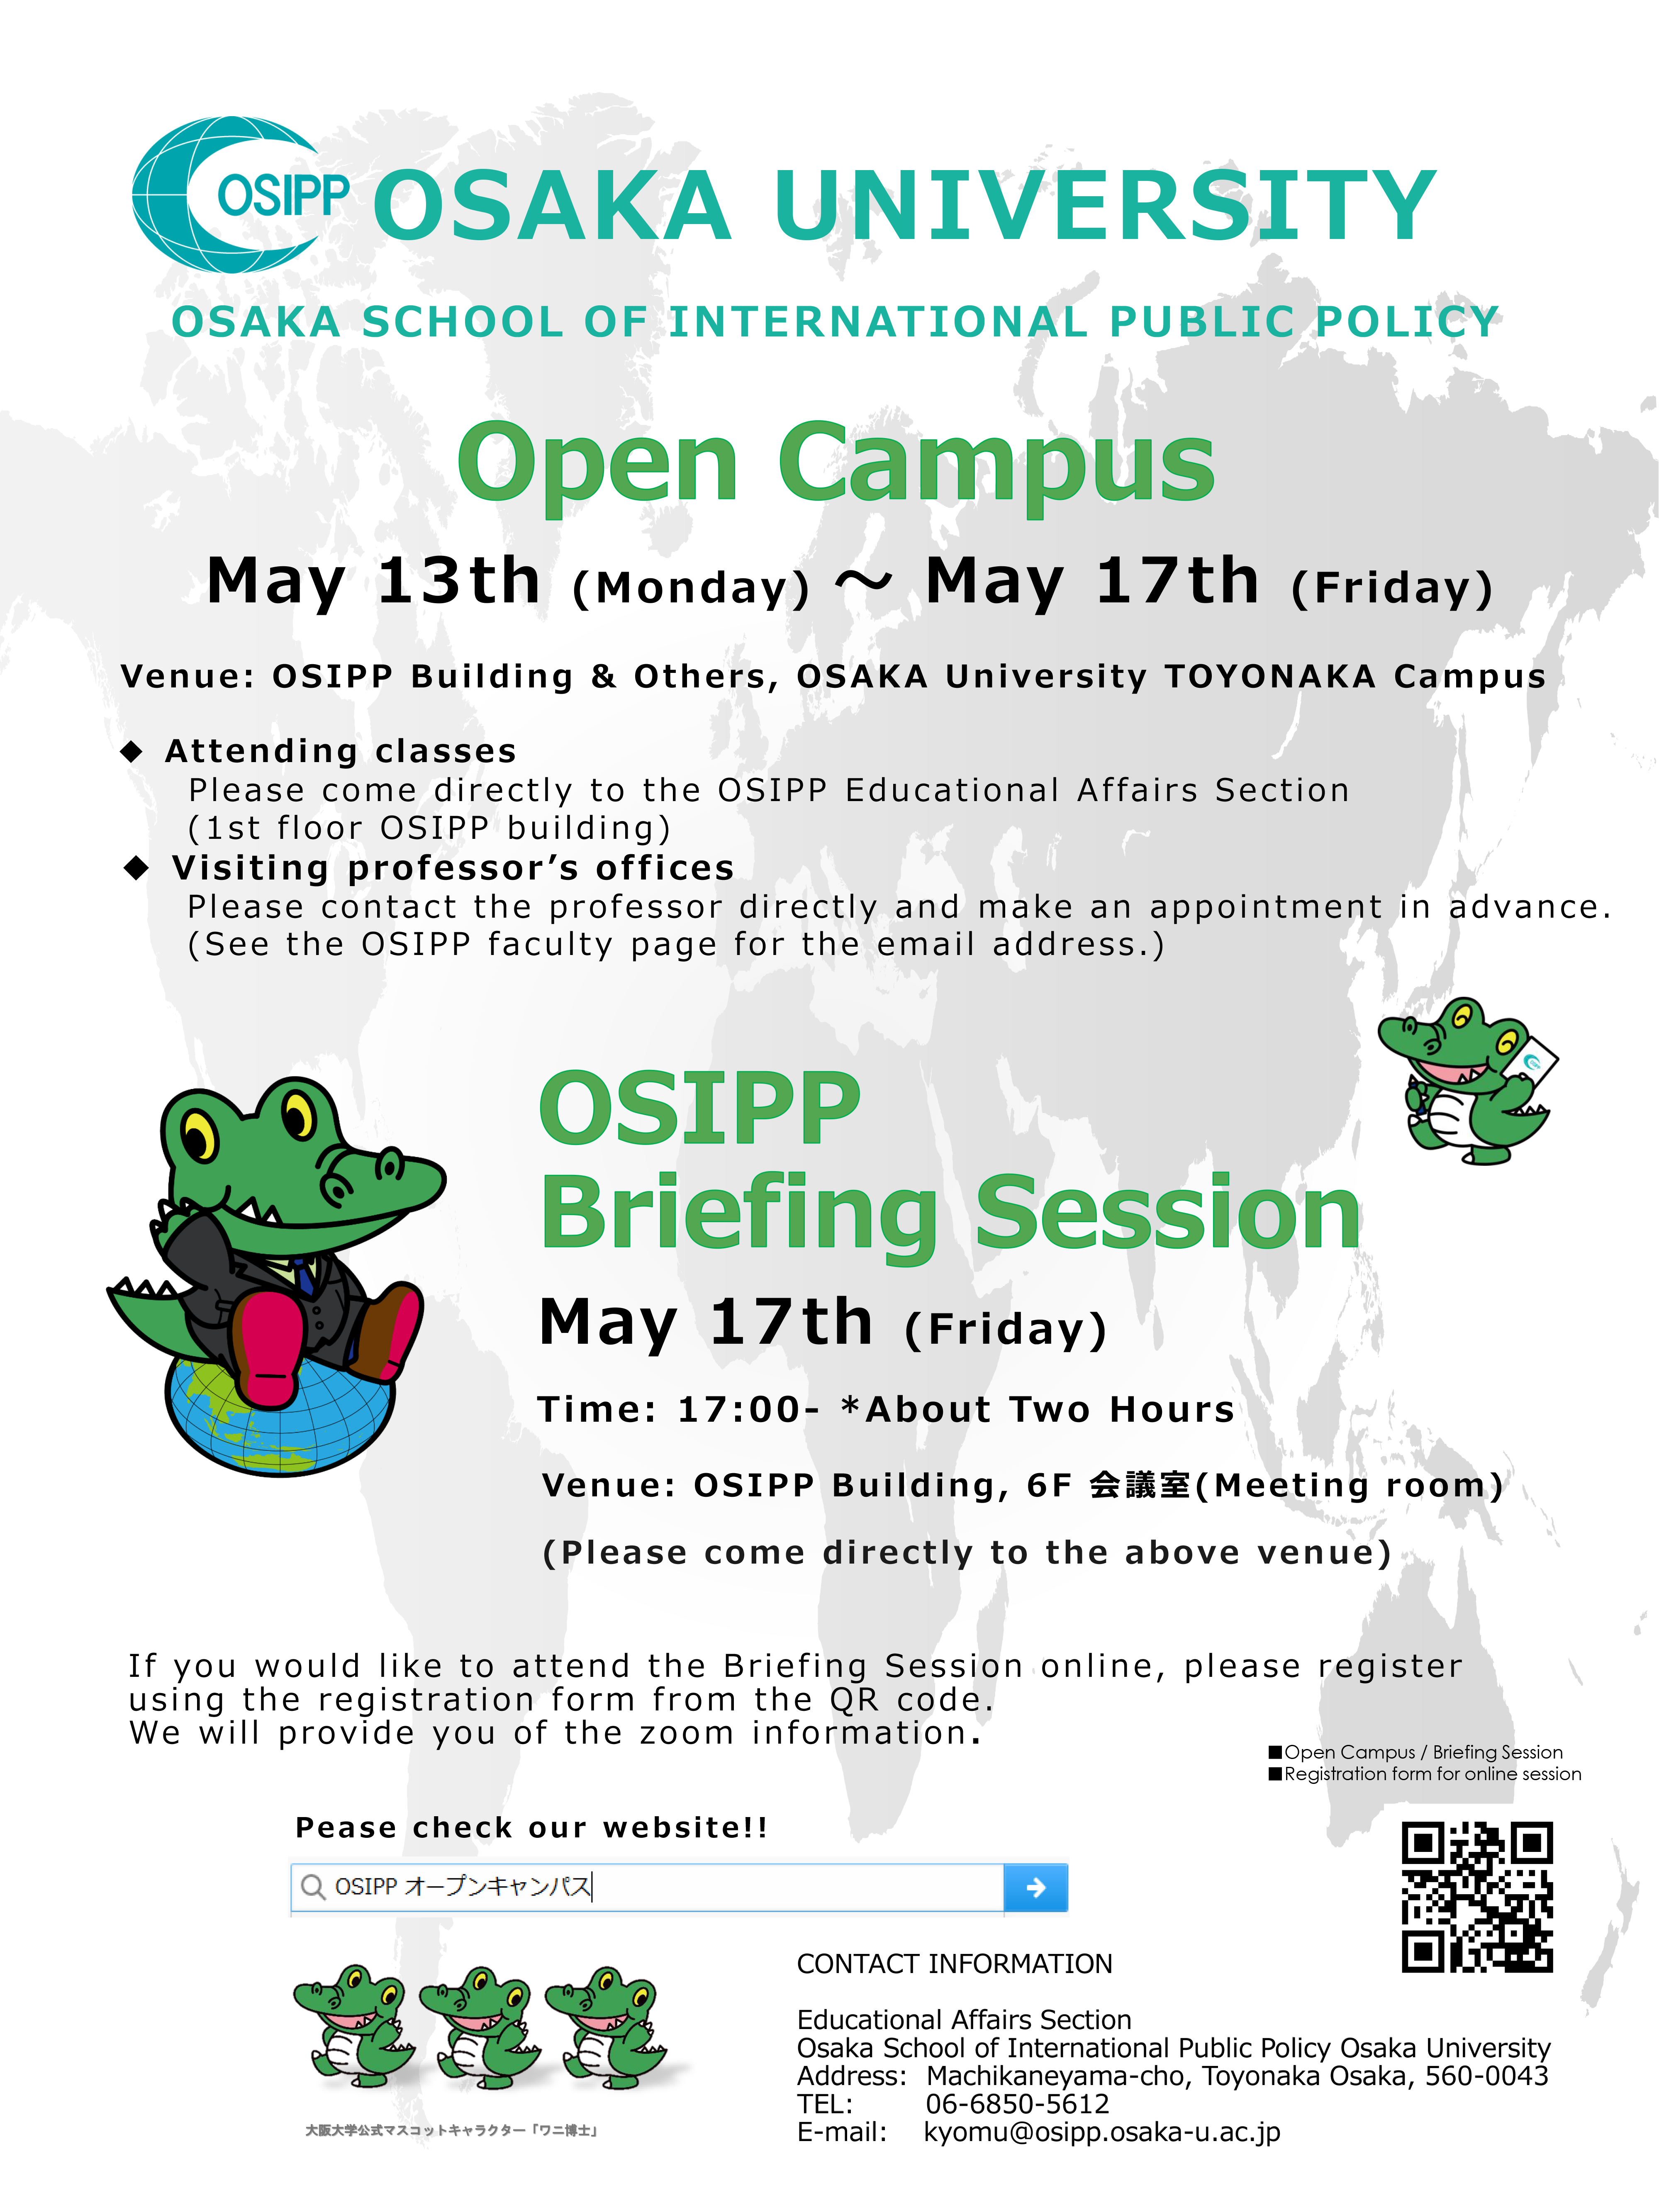 OSIPP Open Campus (5/13) and Briefing Session (5/17)